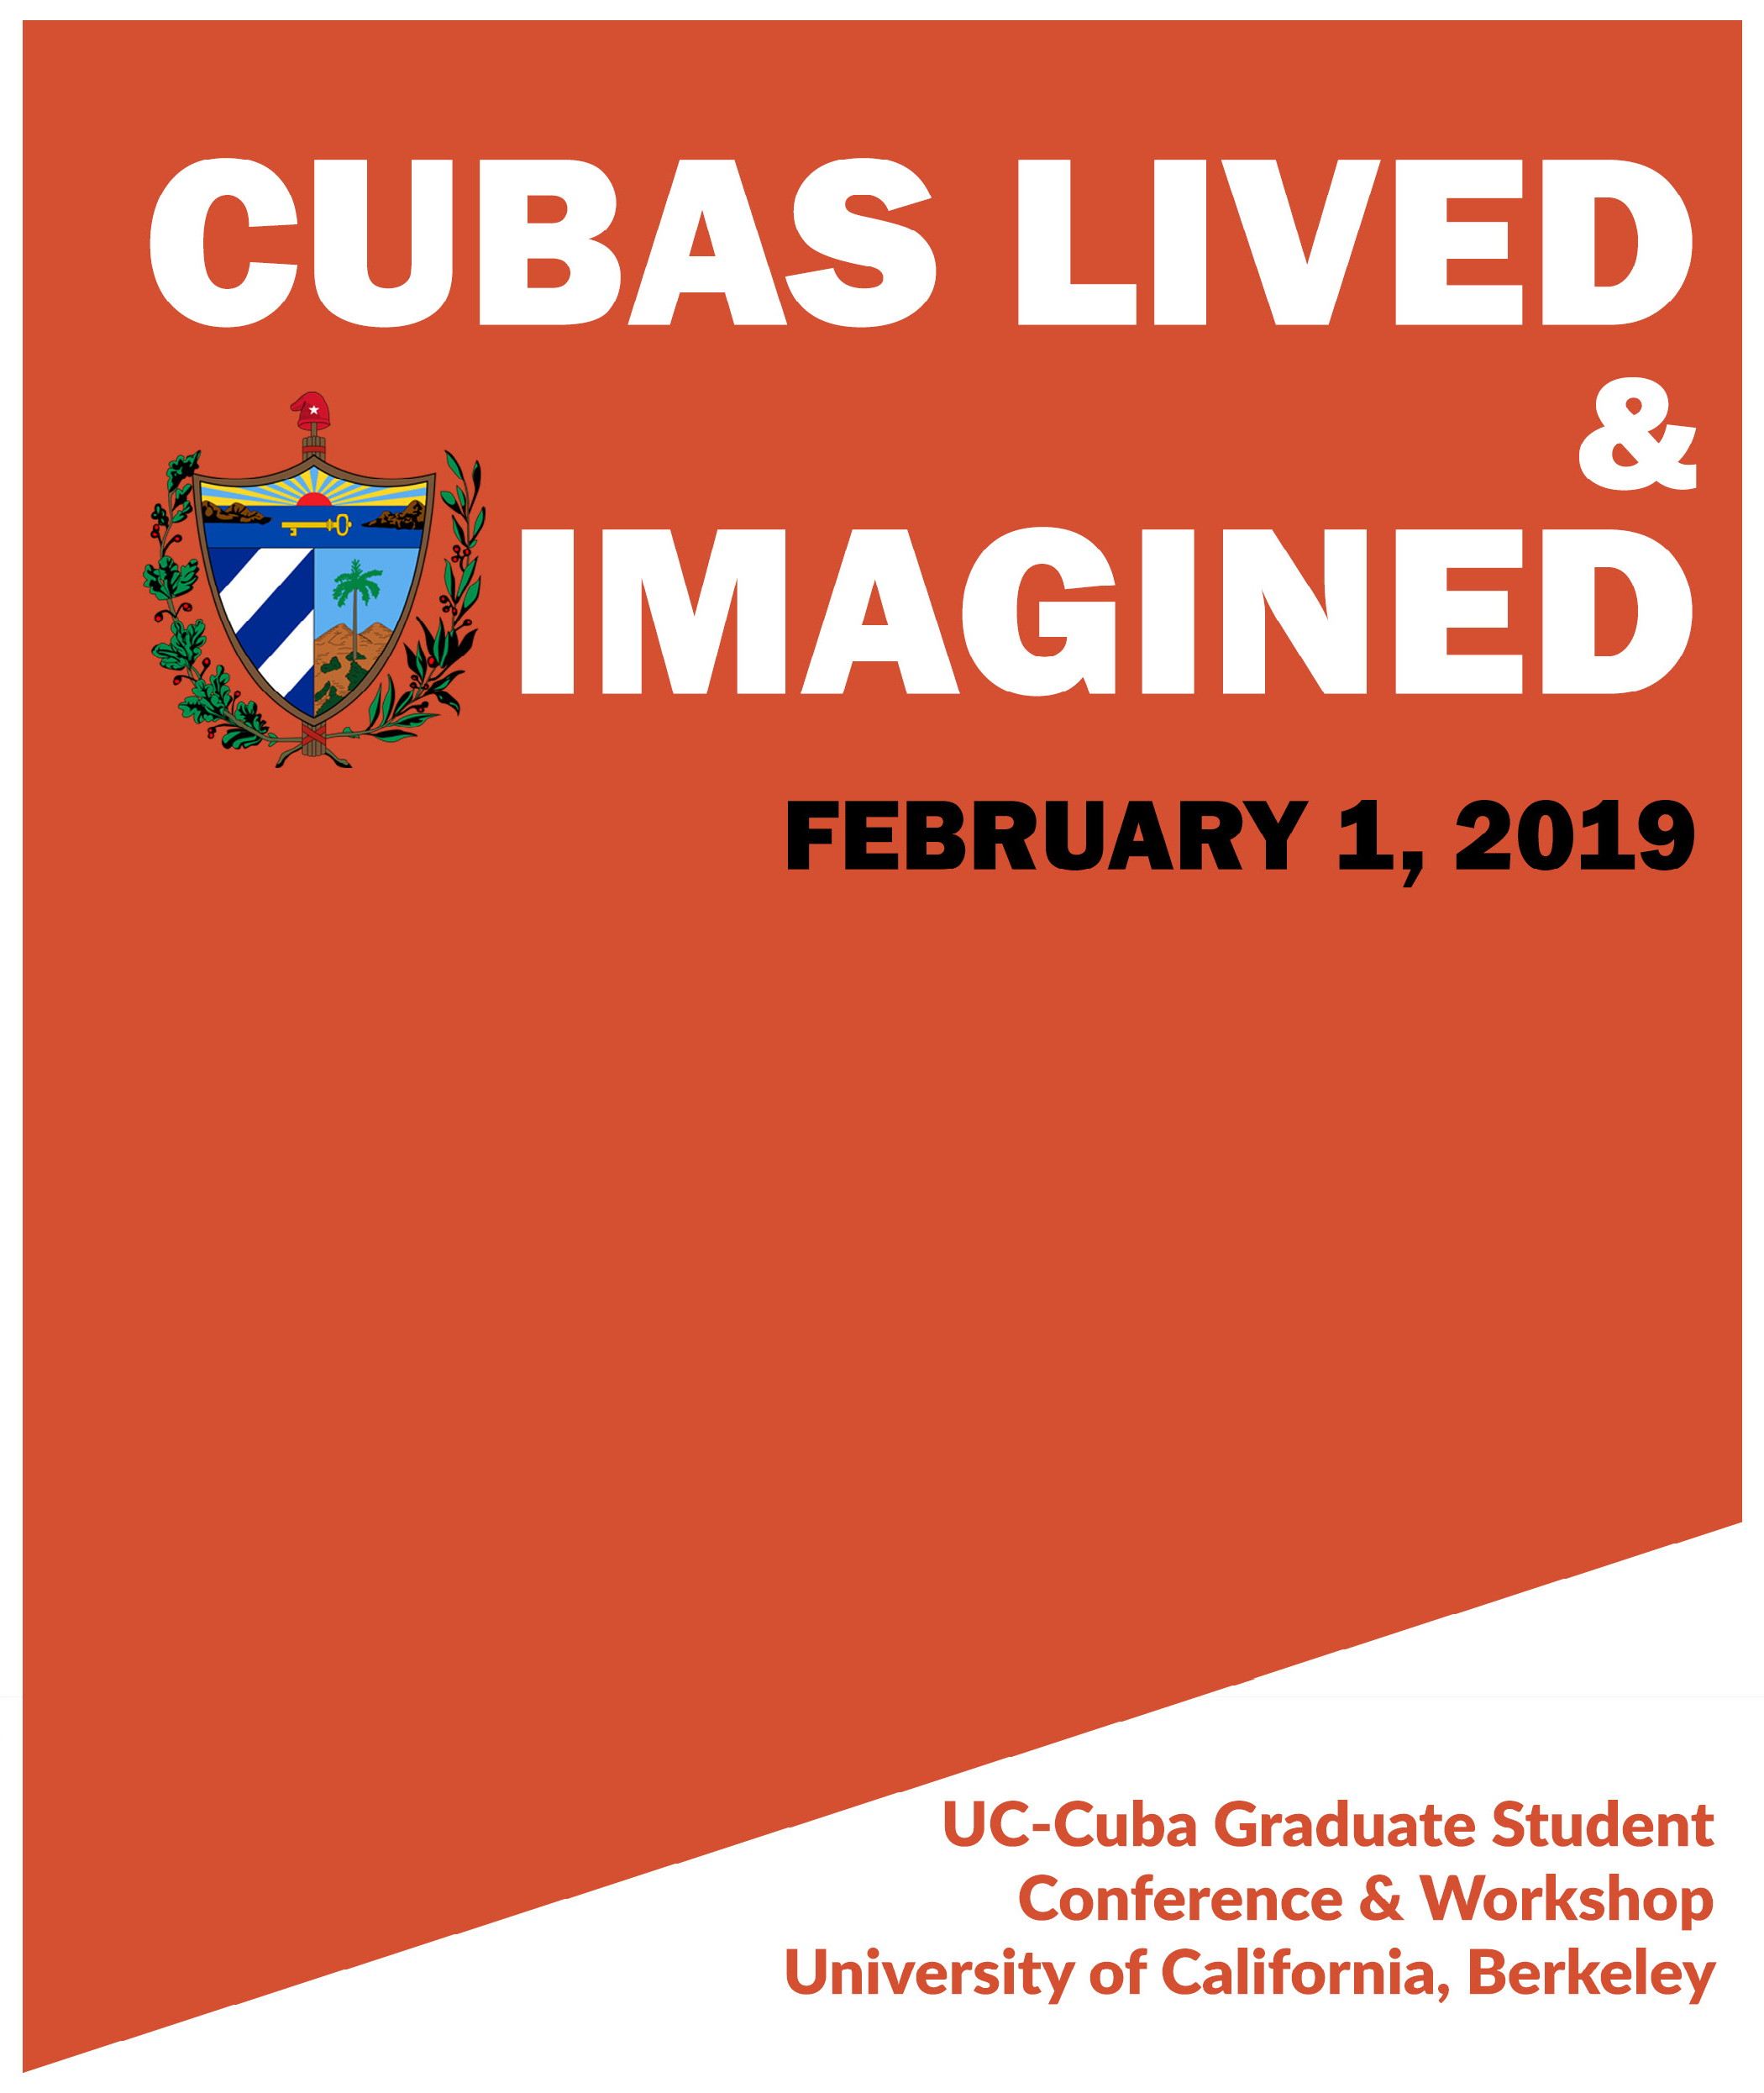 UC-Cuba Conference Poster